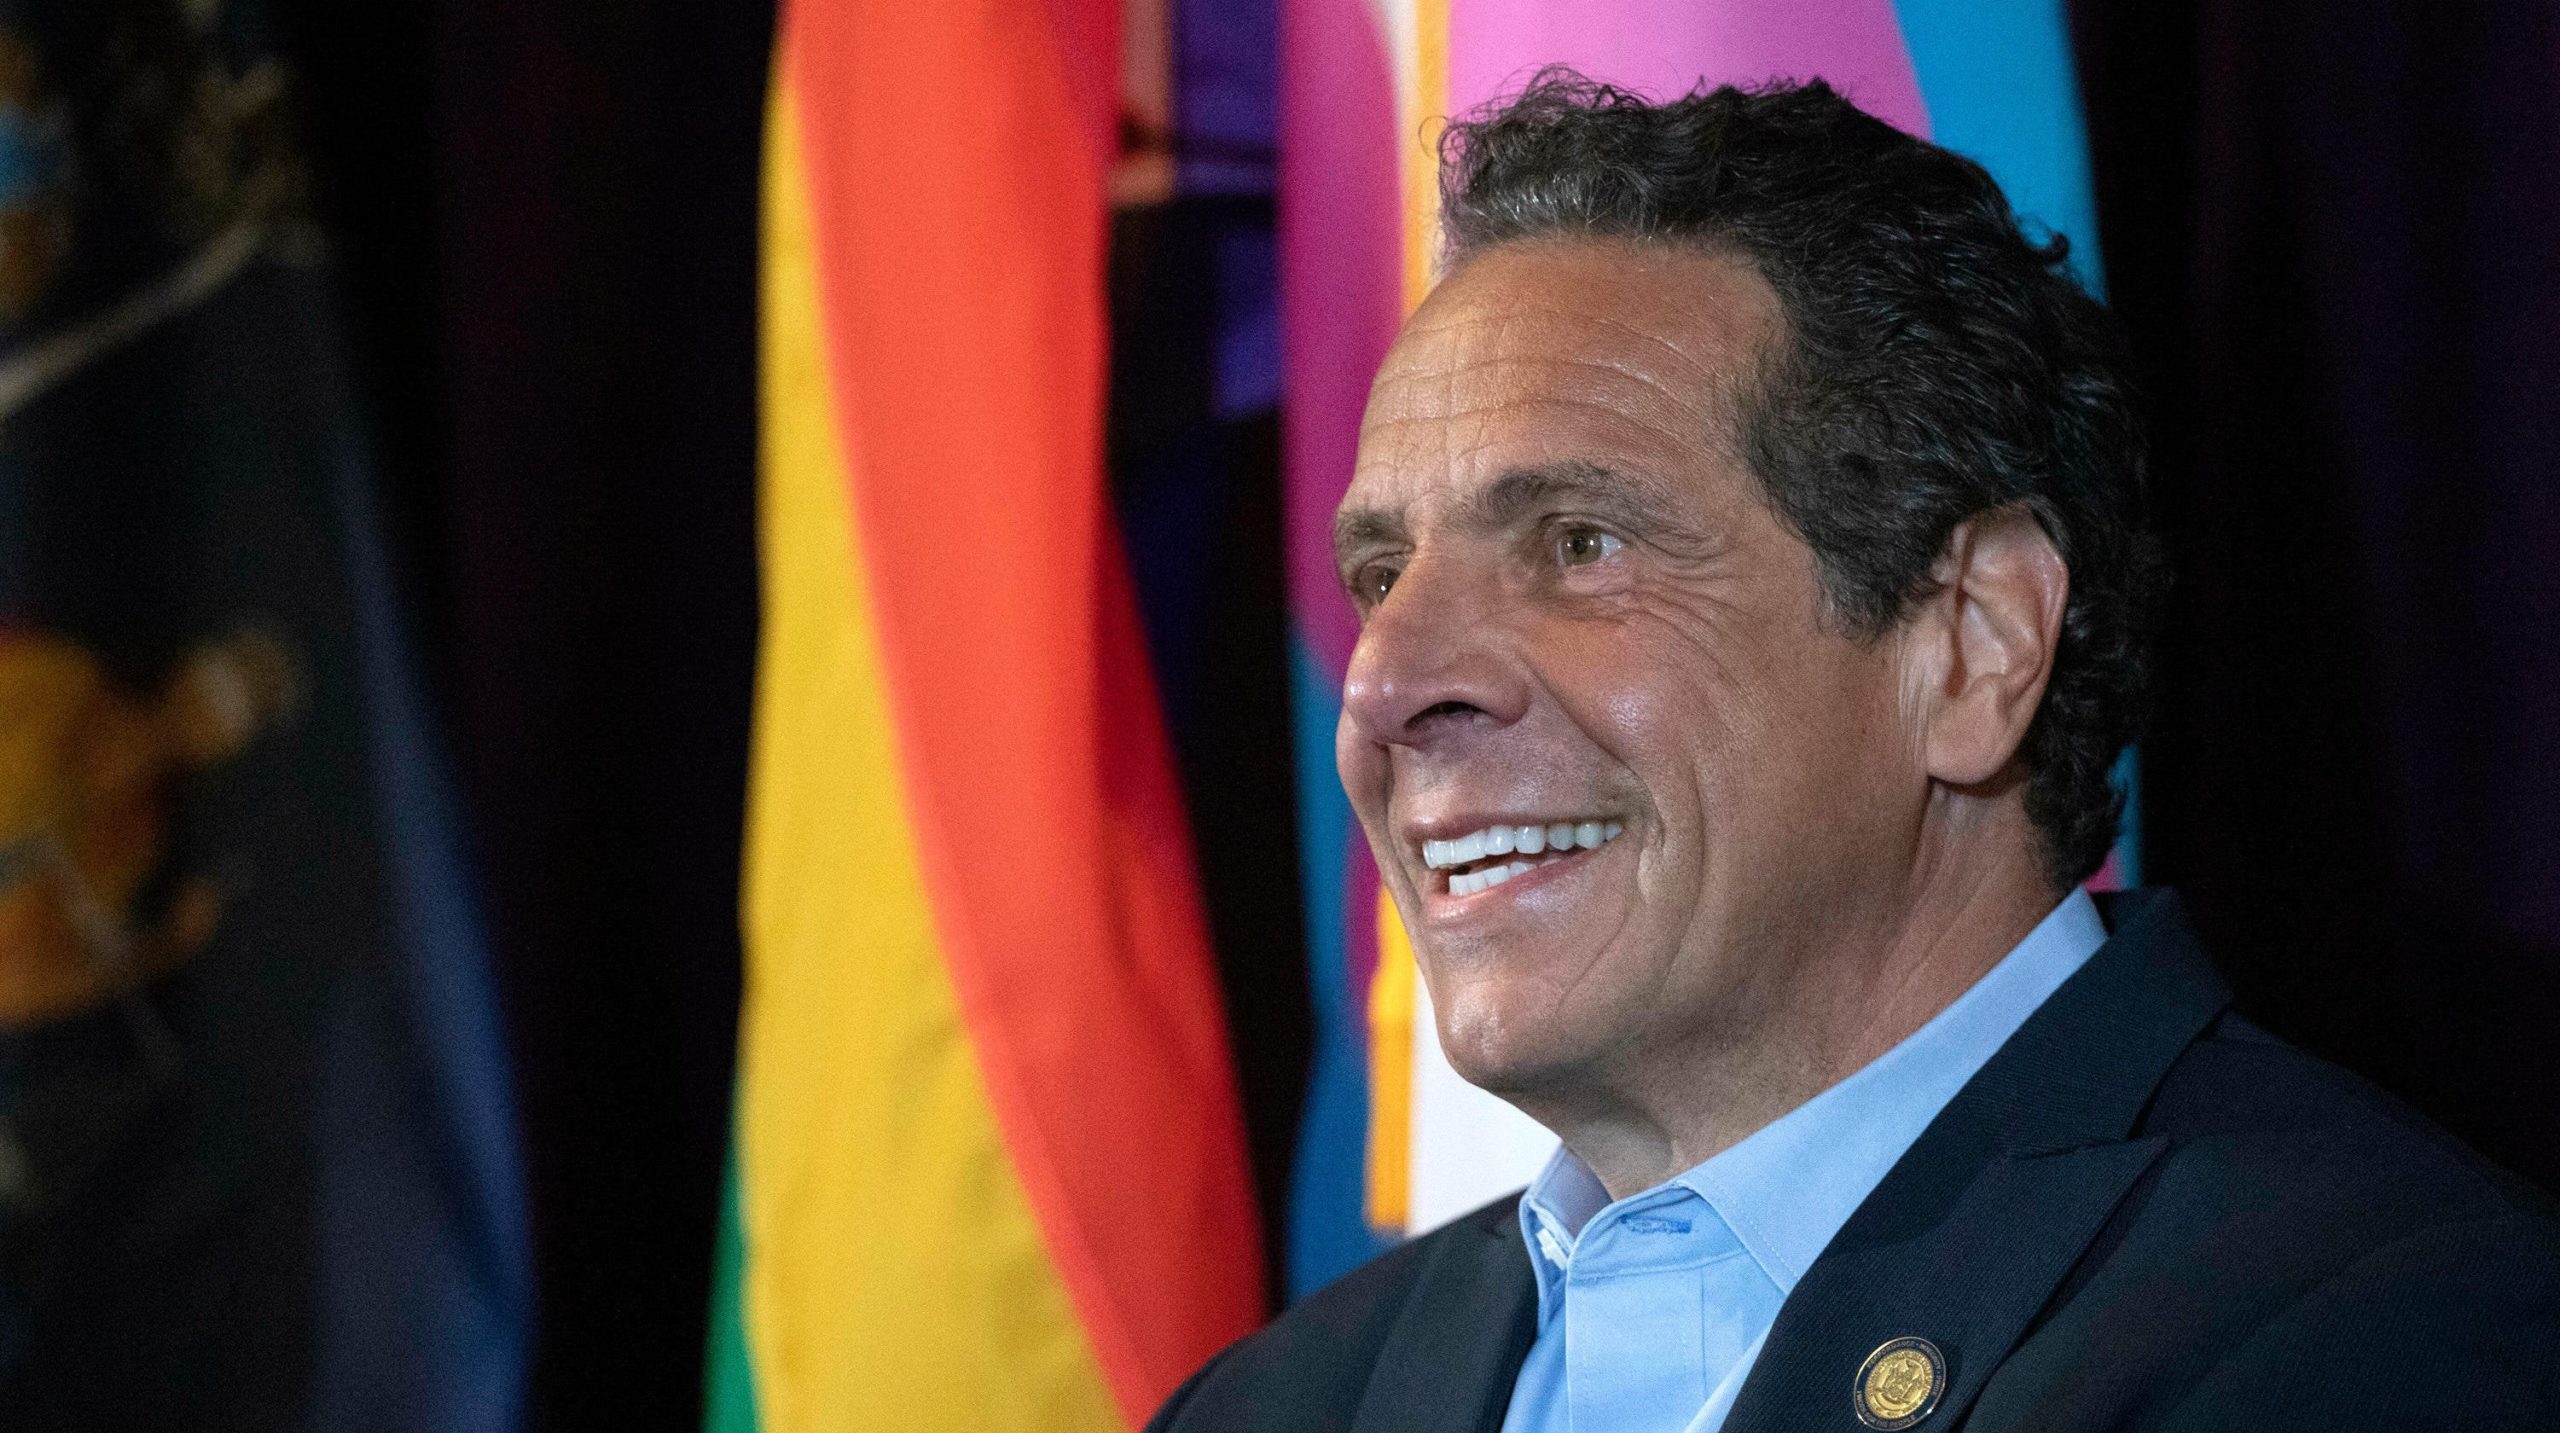 Cuomo: Dems 'should all be primaried' if they can't legalize pot, pass progressive agenda